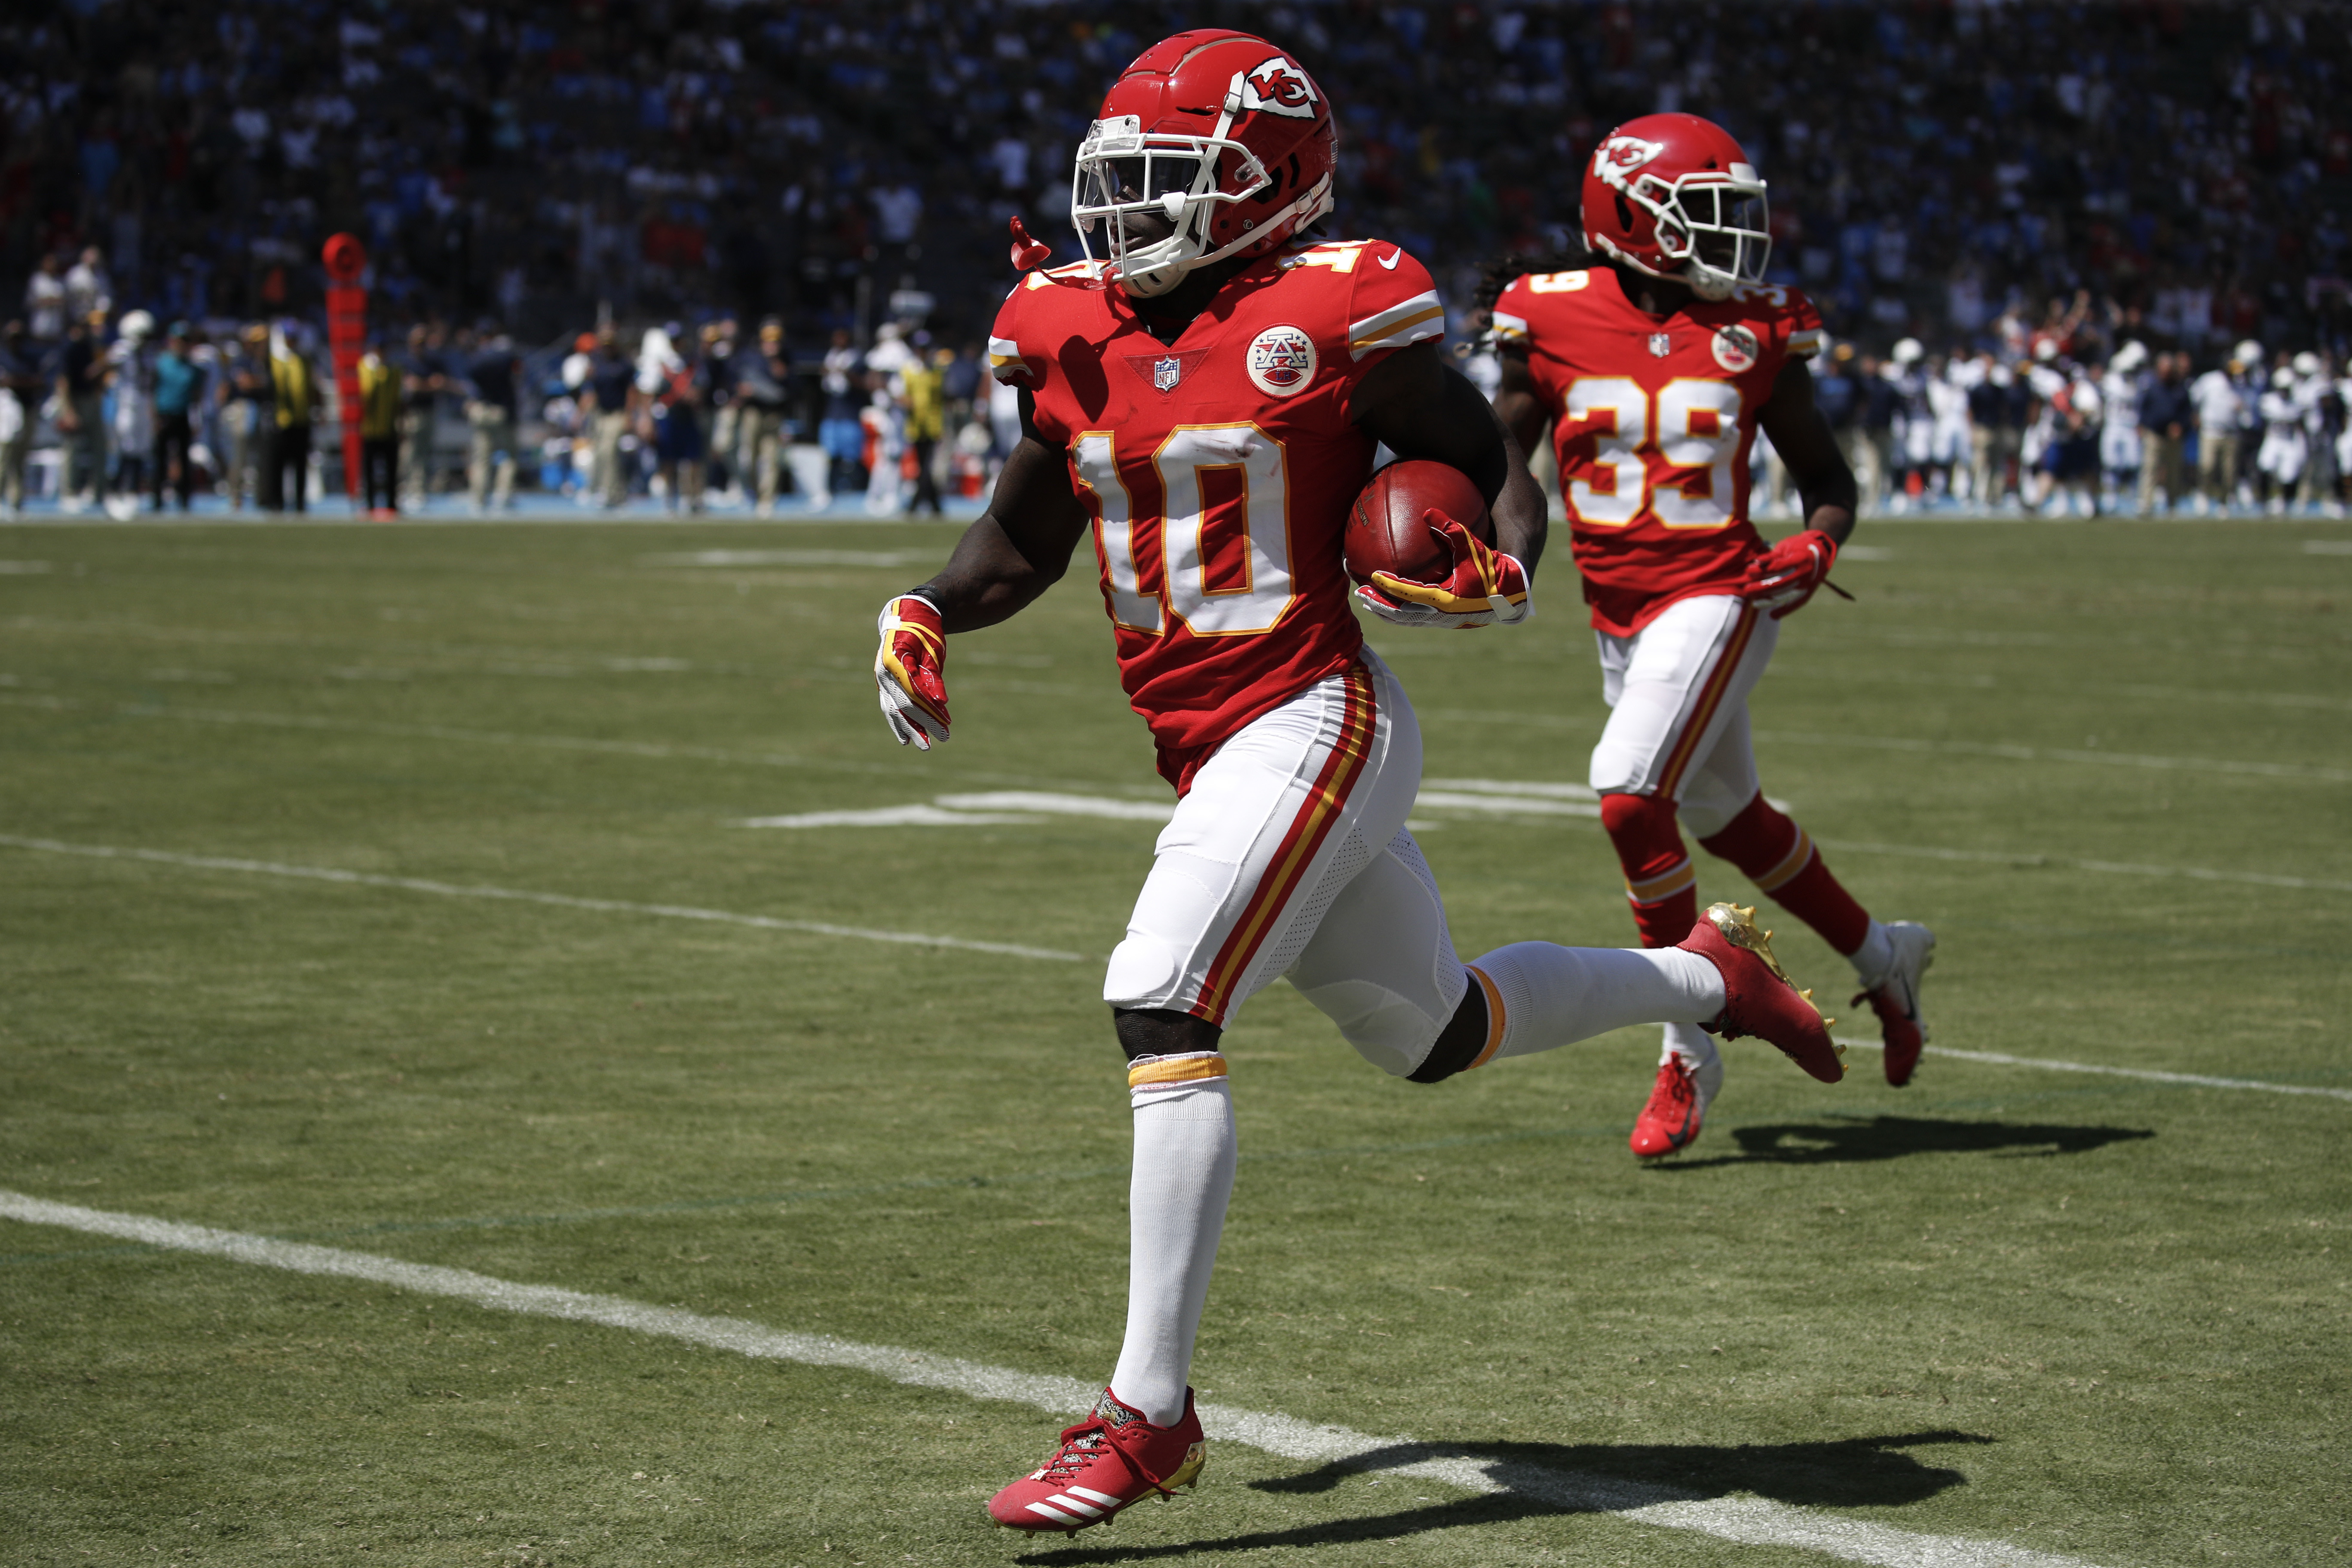 Hill, Mahomes lead Chiefs to 38-28 victory over Chargers